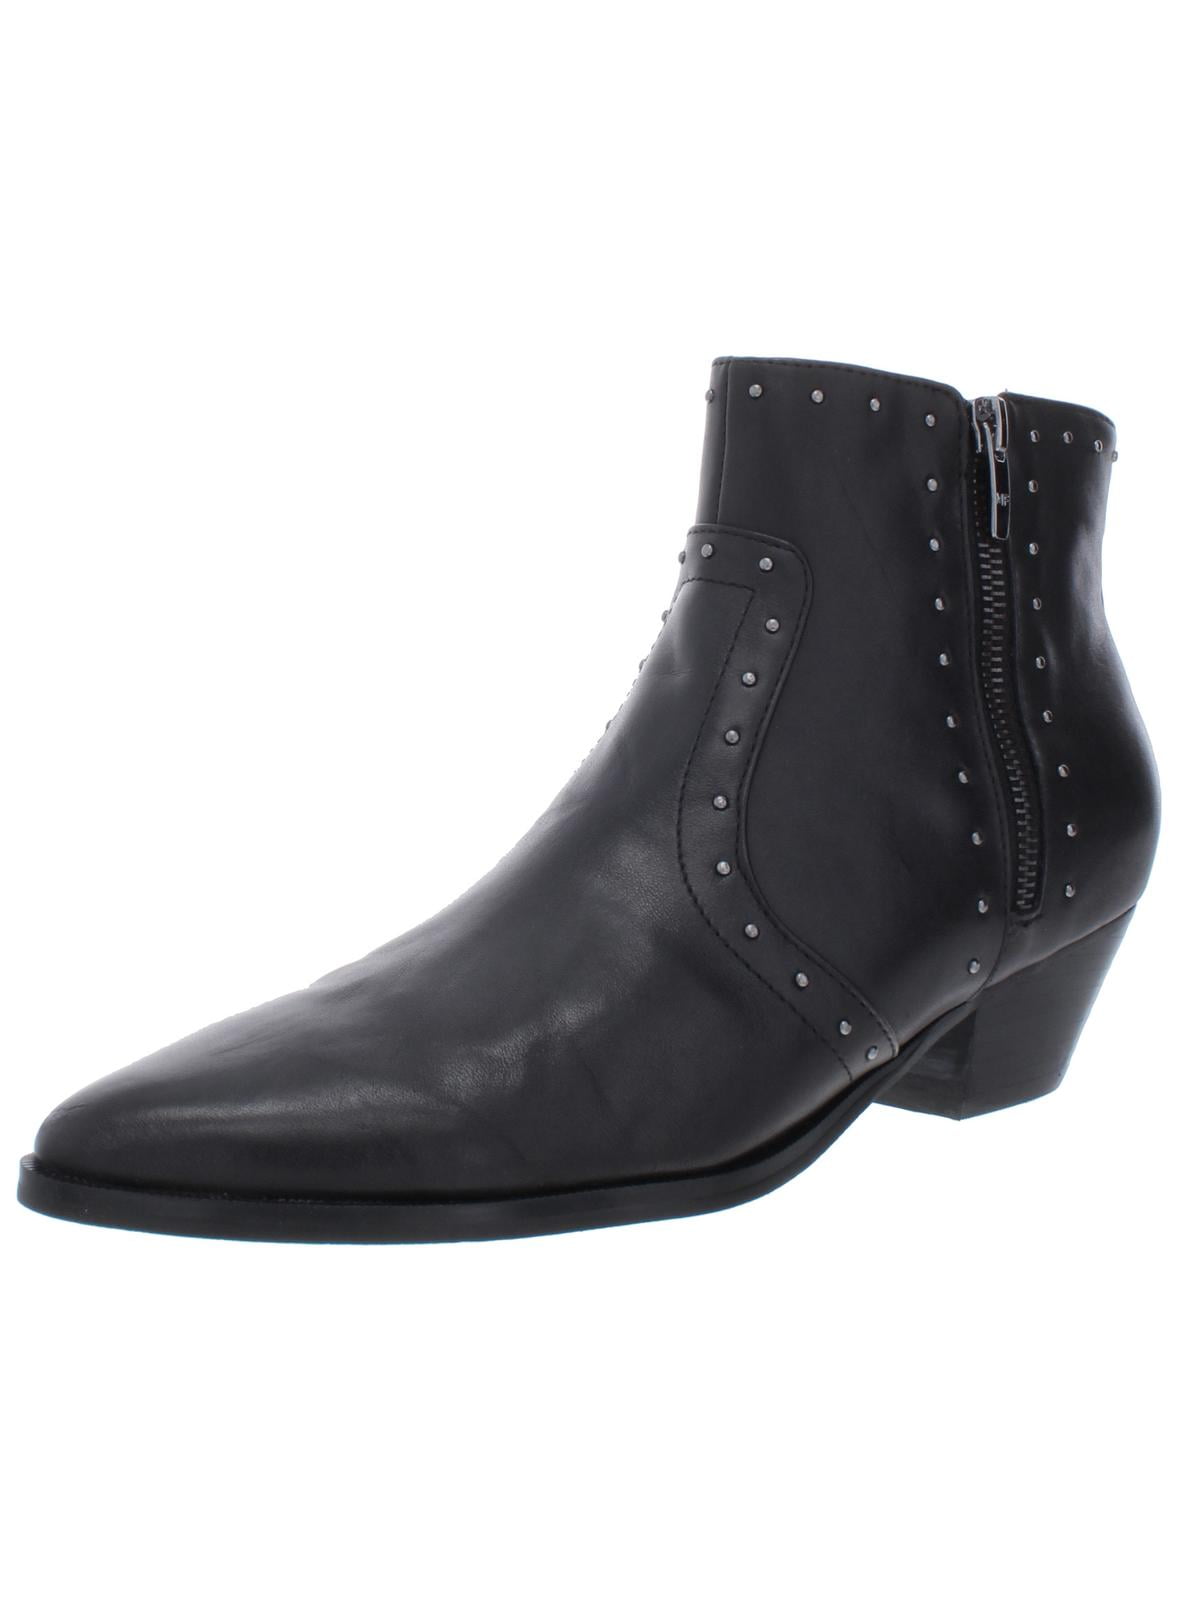 marc fisher studded boots